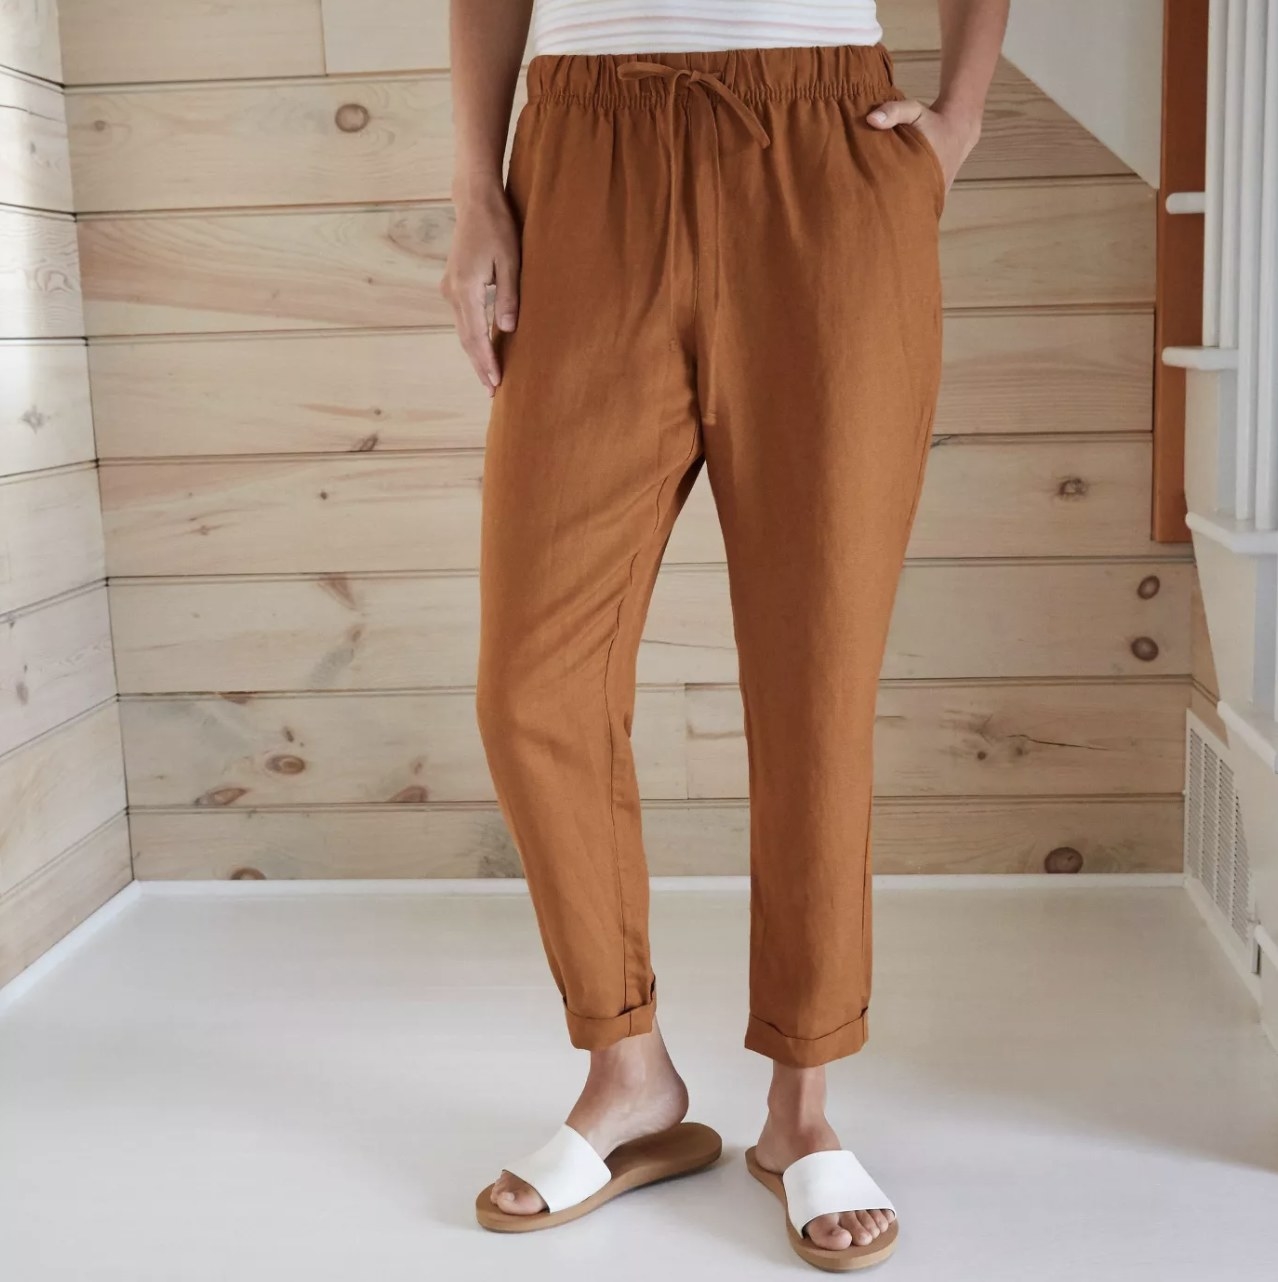 A model wearing dark orange pants that hit above the ankle